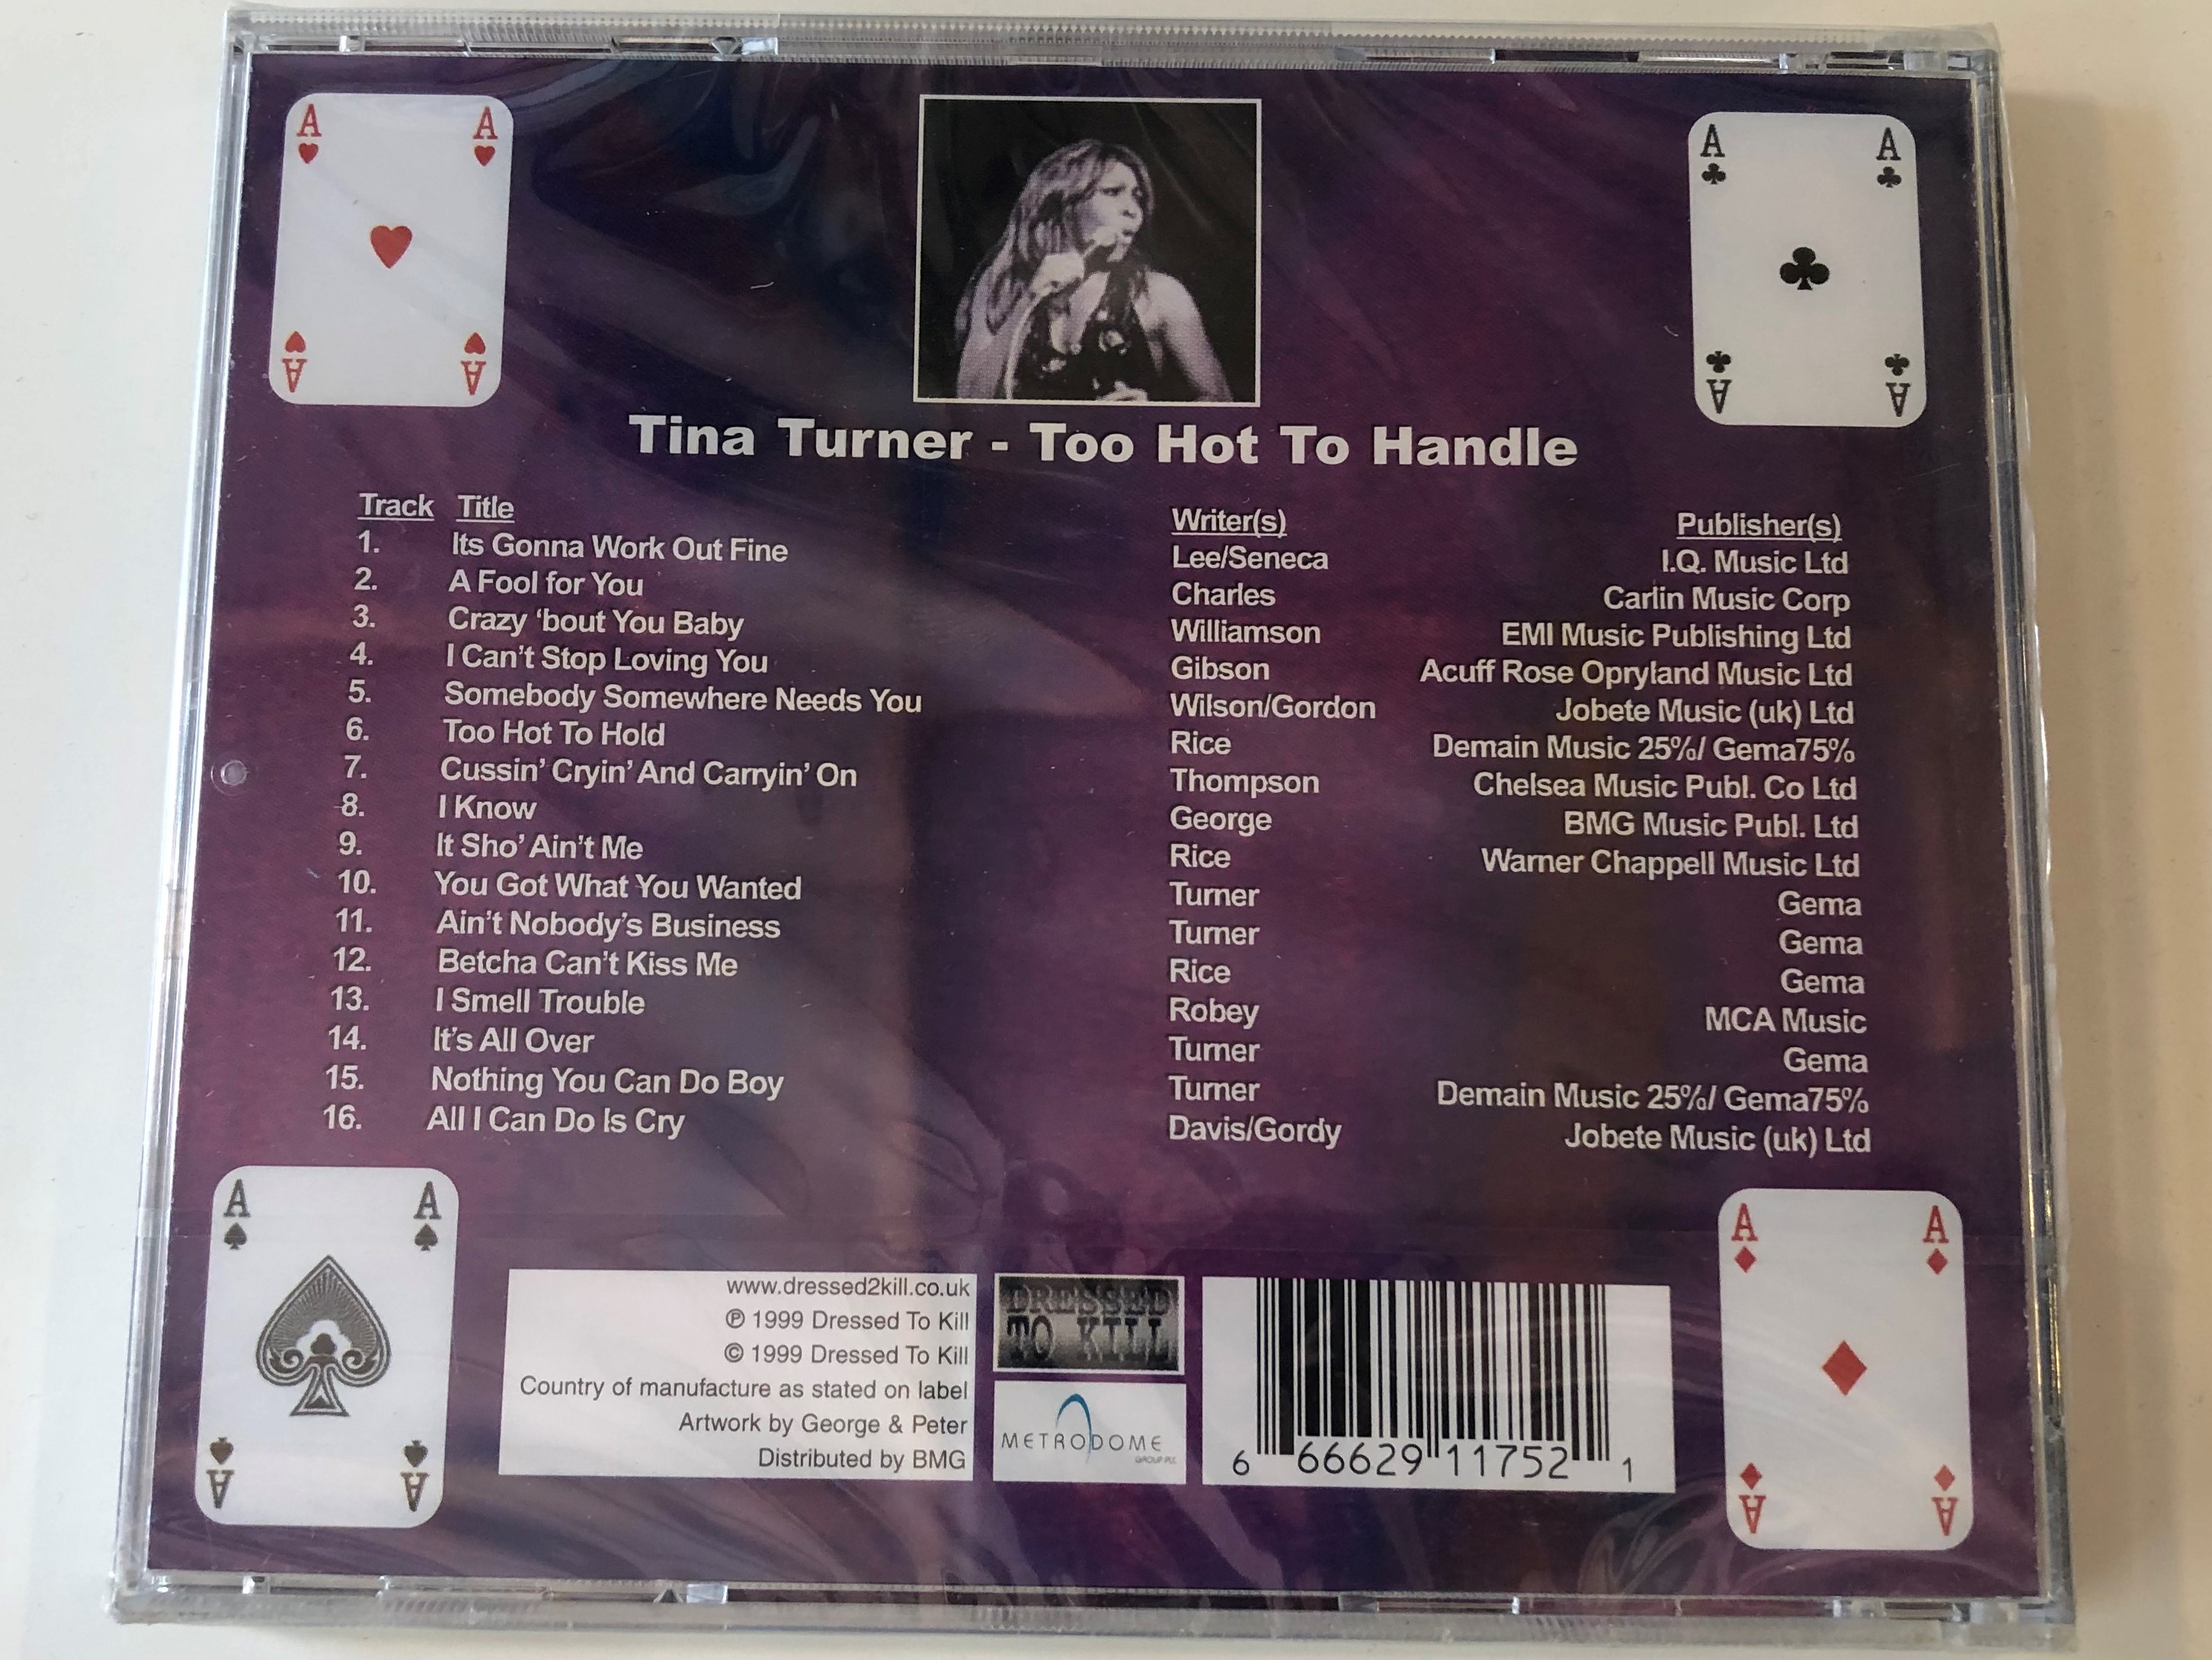 tina-turner-too-hot-to-handle-soul-aces-dressed-to-kill-audio-cd-1999-666629117521-2-.jpg